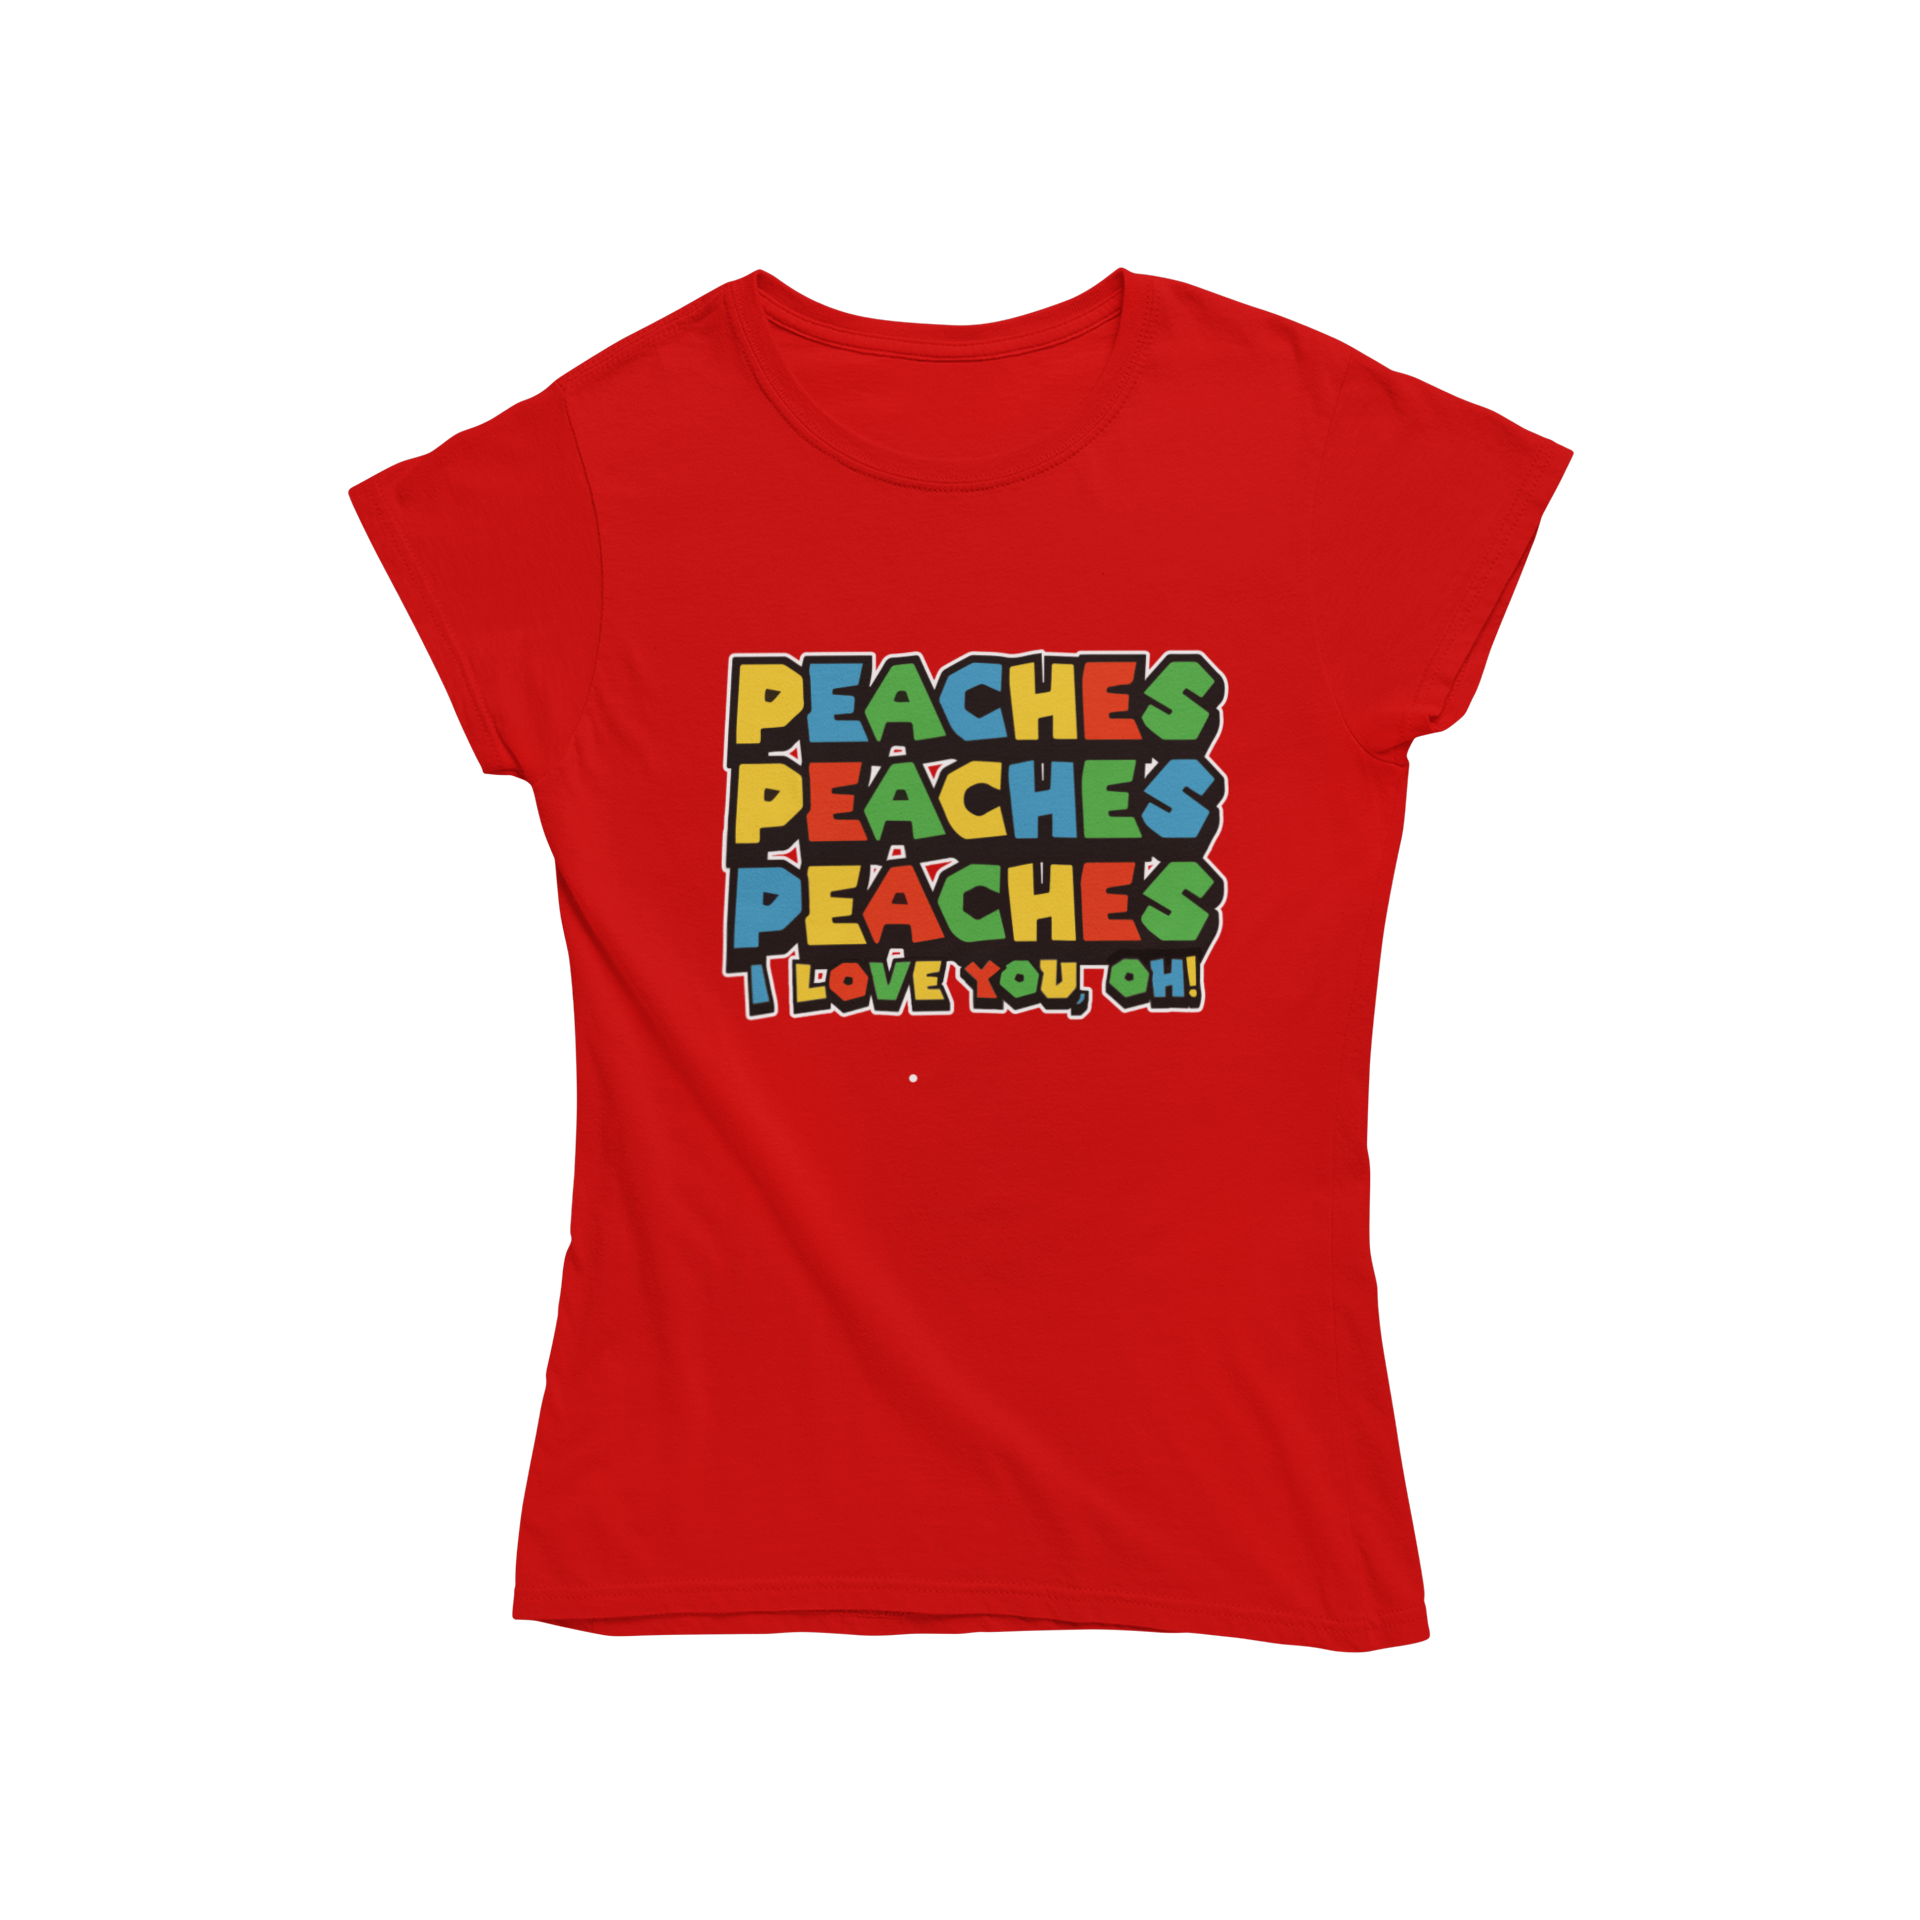  Get ready to level up your style with Teevolution's Super Mario inspired women's t-shirt featuring the iconic lyrics "peaches." Embrace your Bowser and show off your love for nostalgia with this trendy and unique shirt.